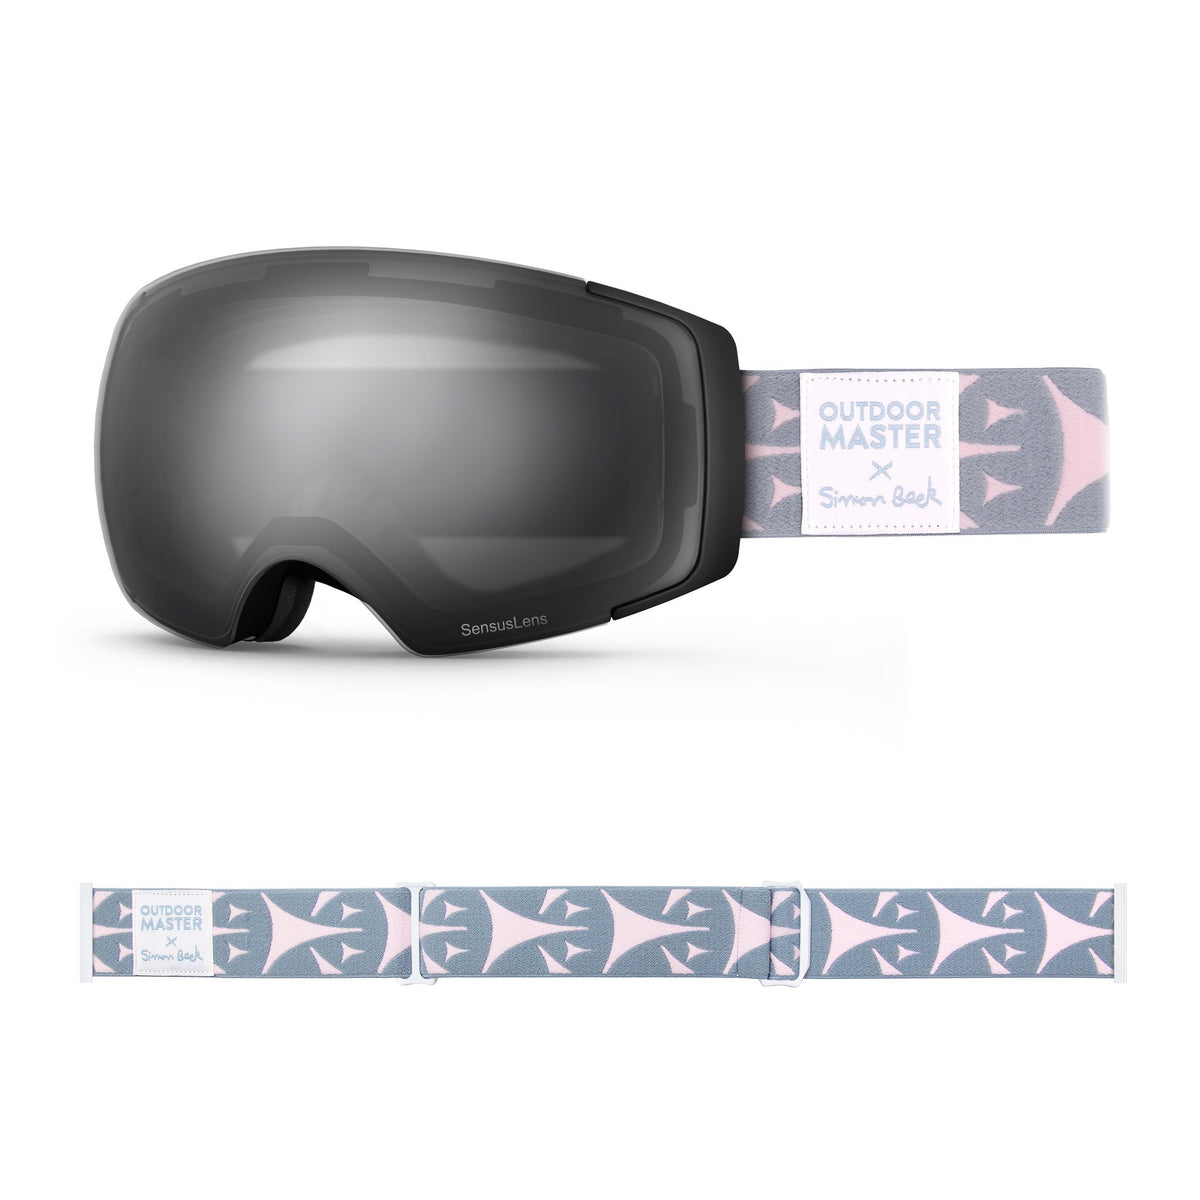 OutdoorMaster x Simon Beck Ski Goggles Pro Series - Snowshoeing Art Limited Edition OutdoorMaster SensusLens VLT 13-60% From Light to Dark Grey Bouncy Triangles